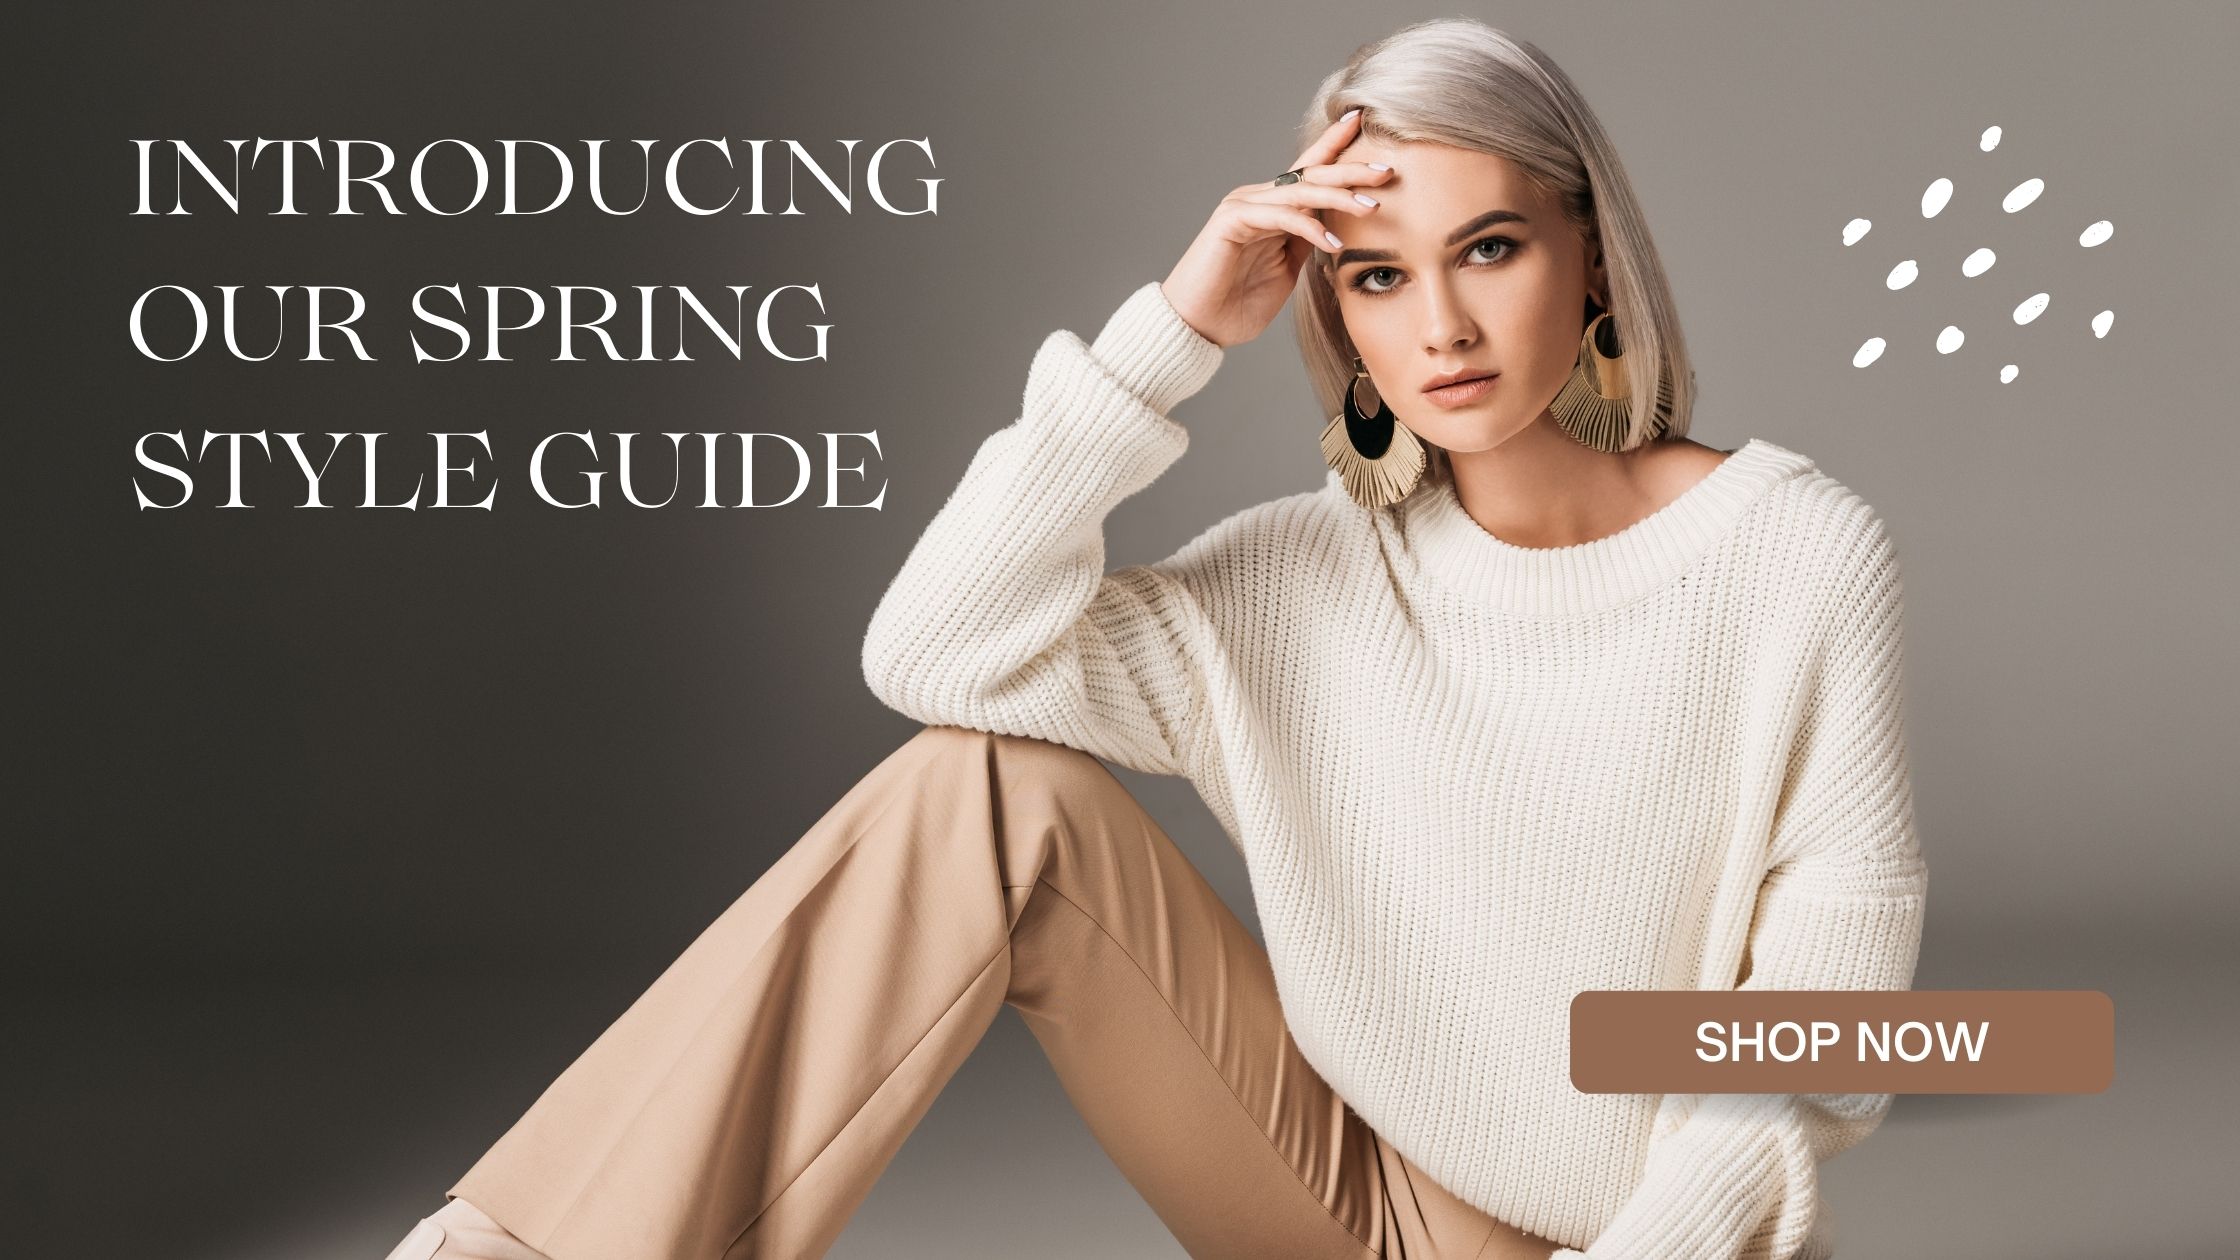 You are currently viewing INTRODUCING OUR SPRING STYLE GUIDE